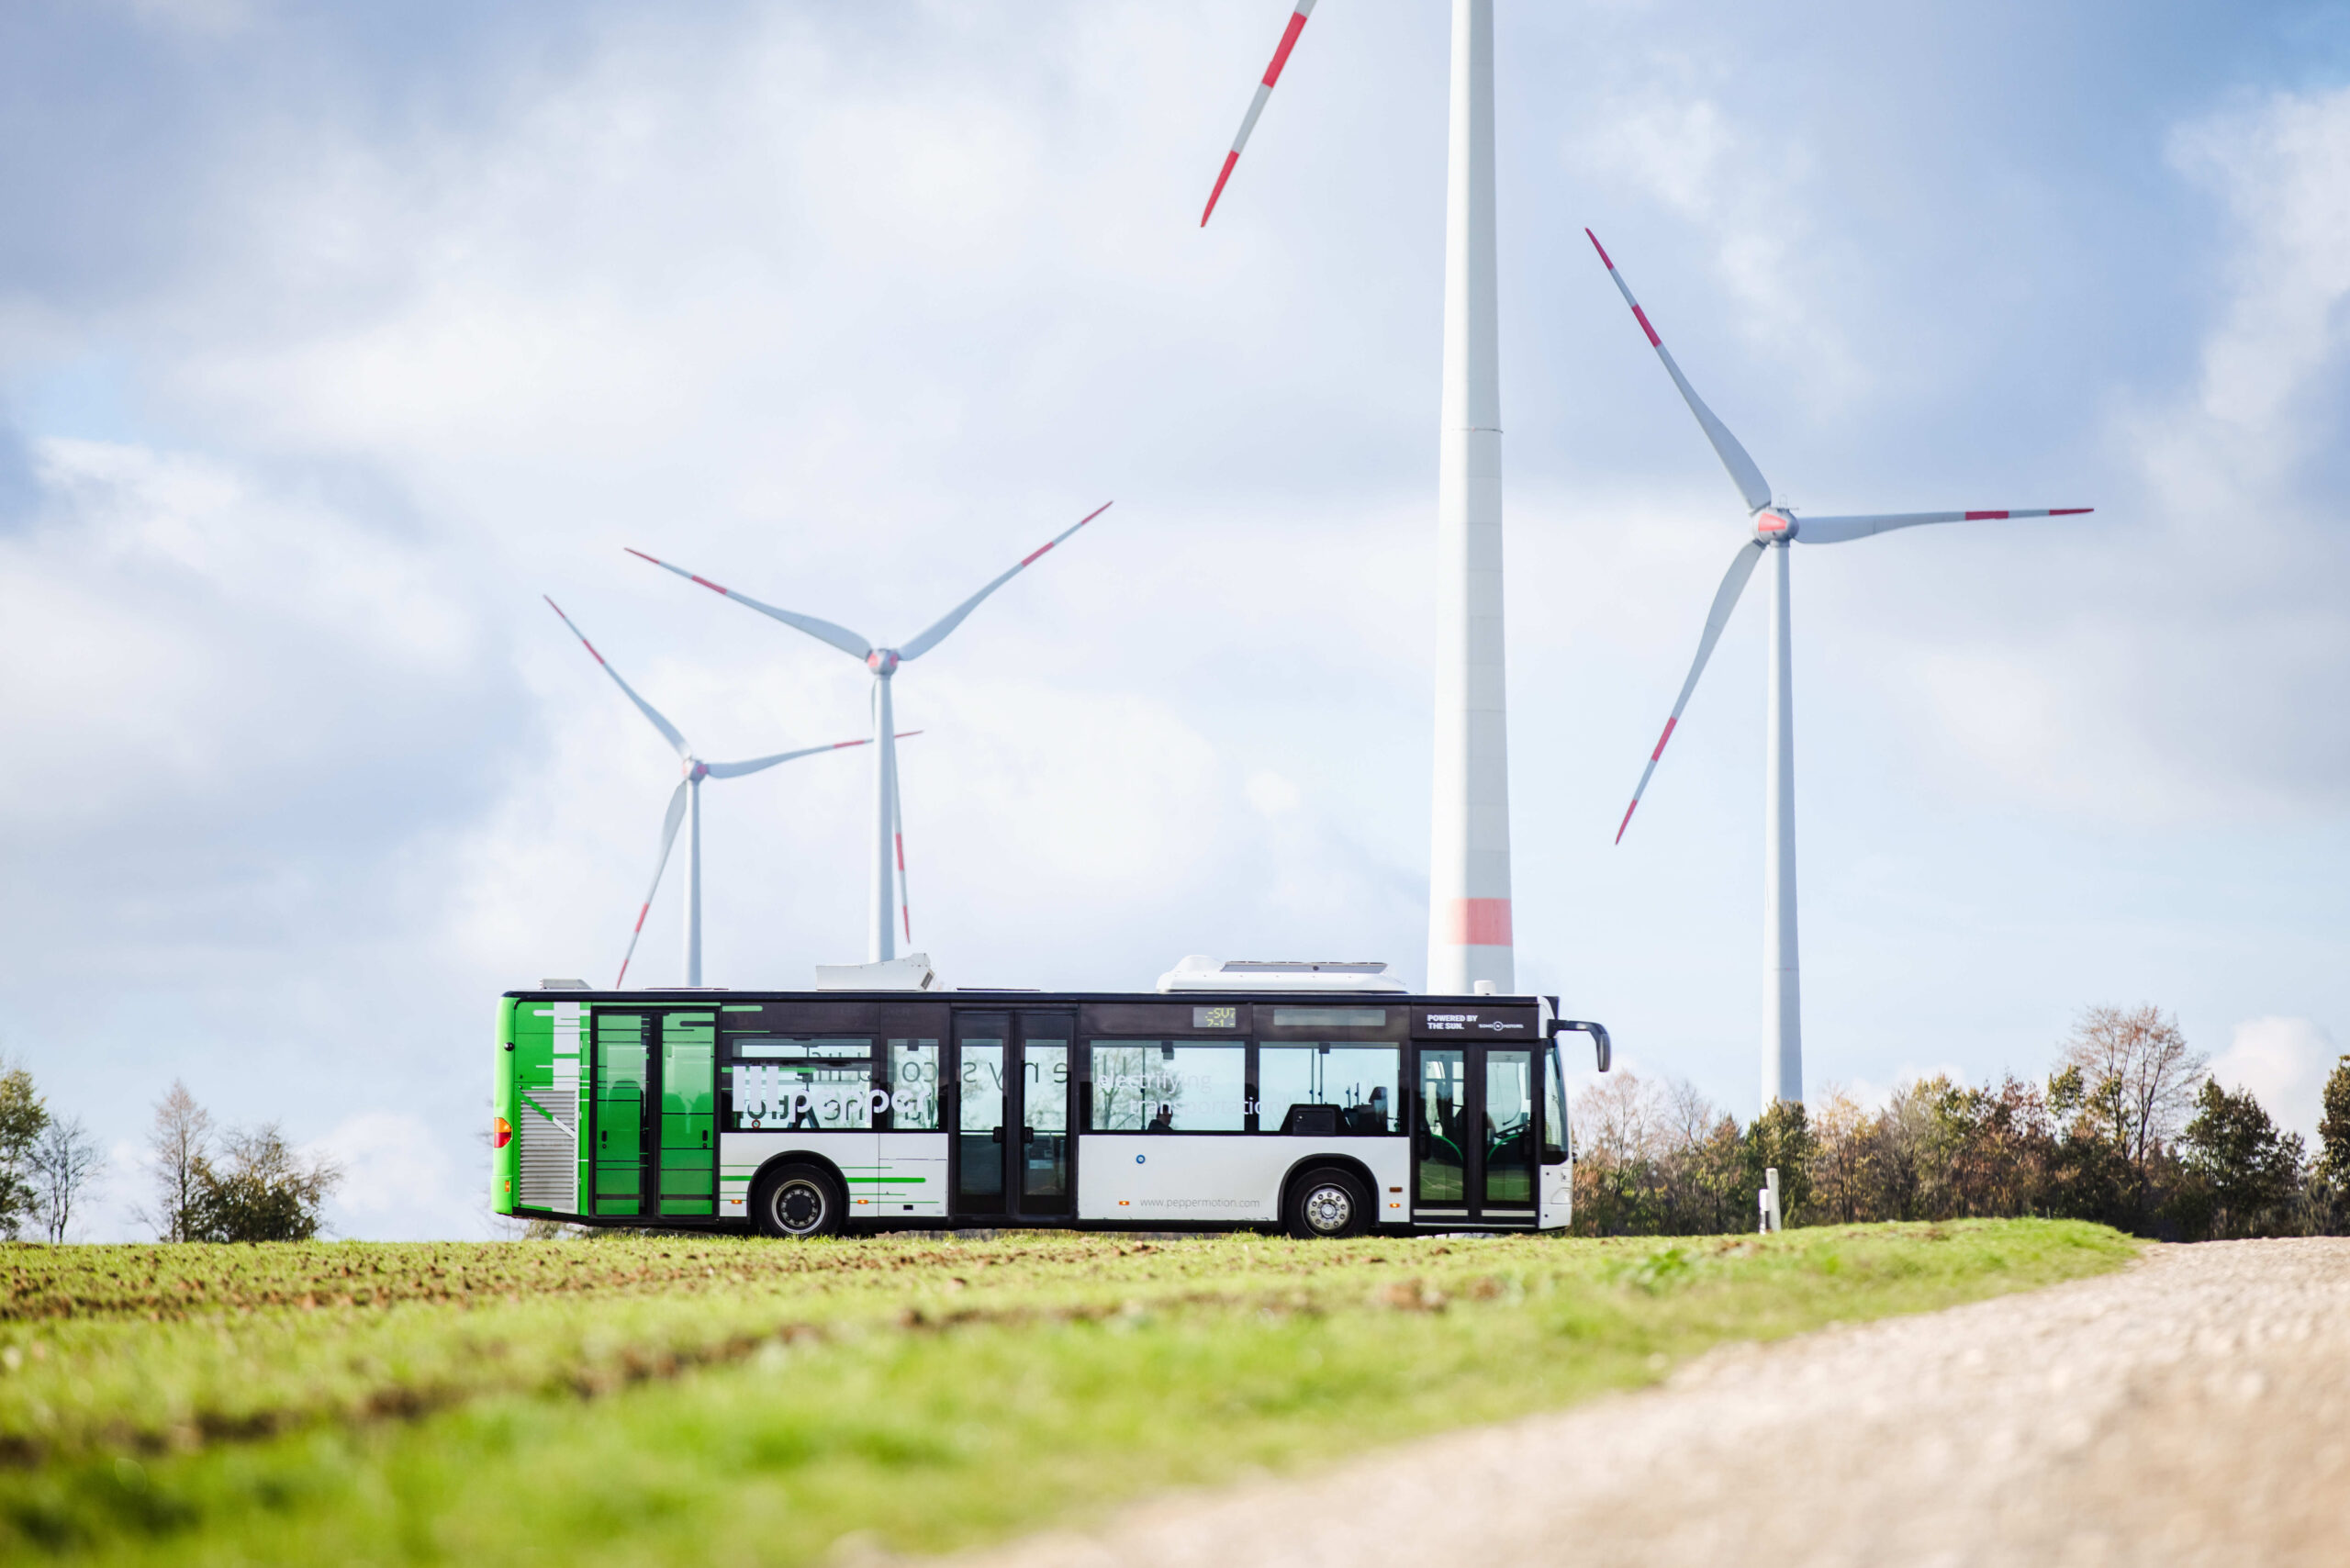 https://e-vehicleinfo.com/global/sono-motors-and-pepper-launch-solar-powered-electric-bus/